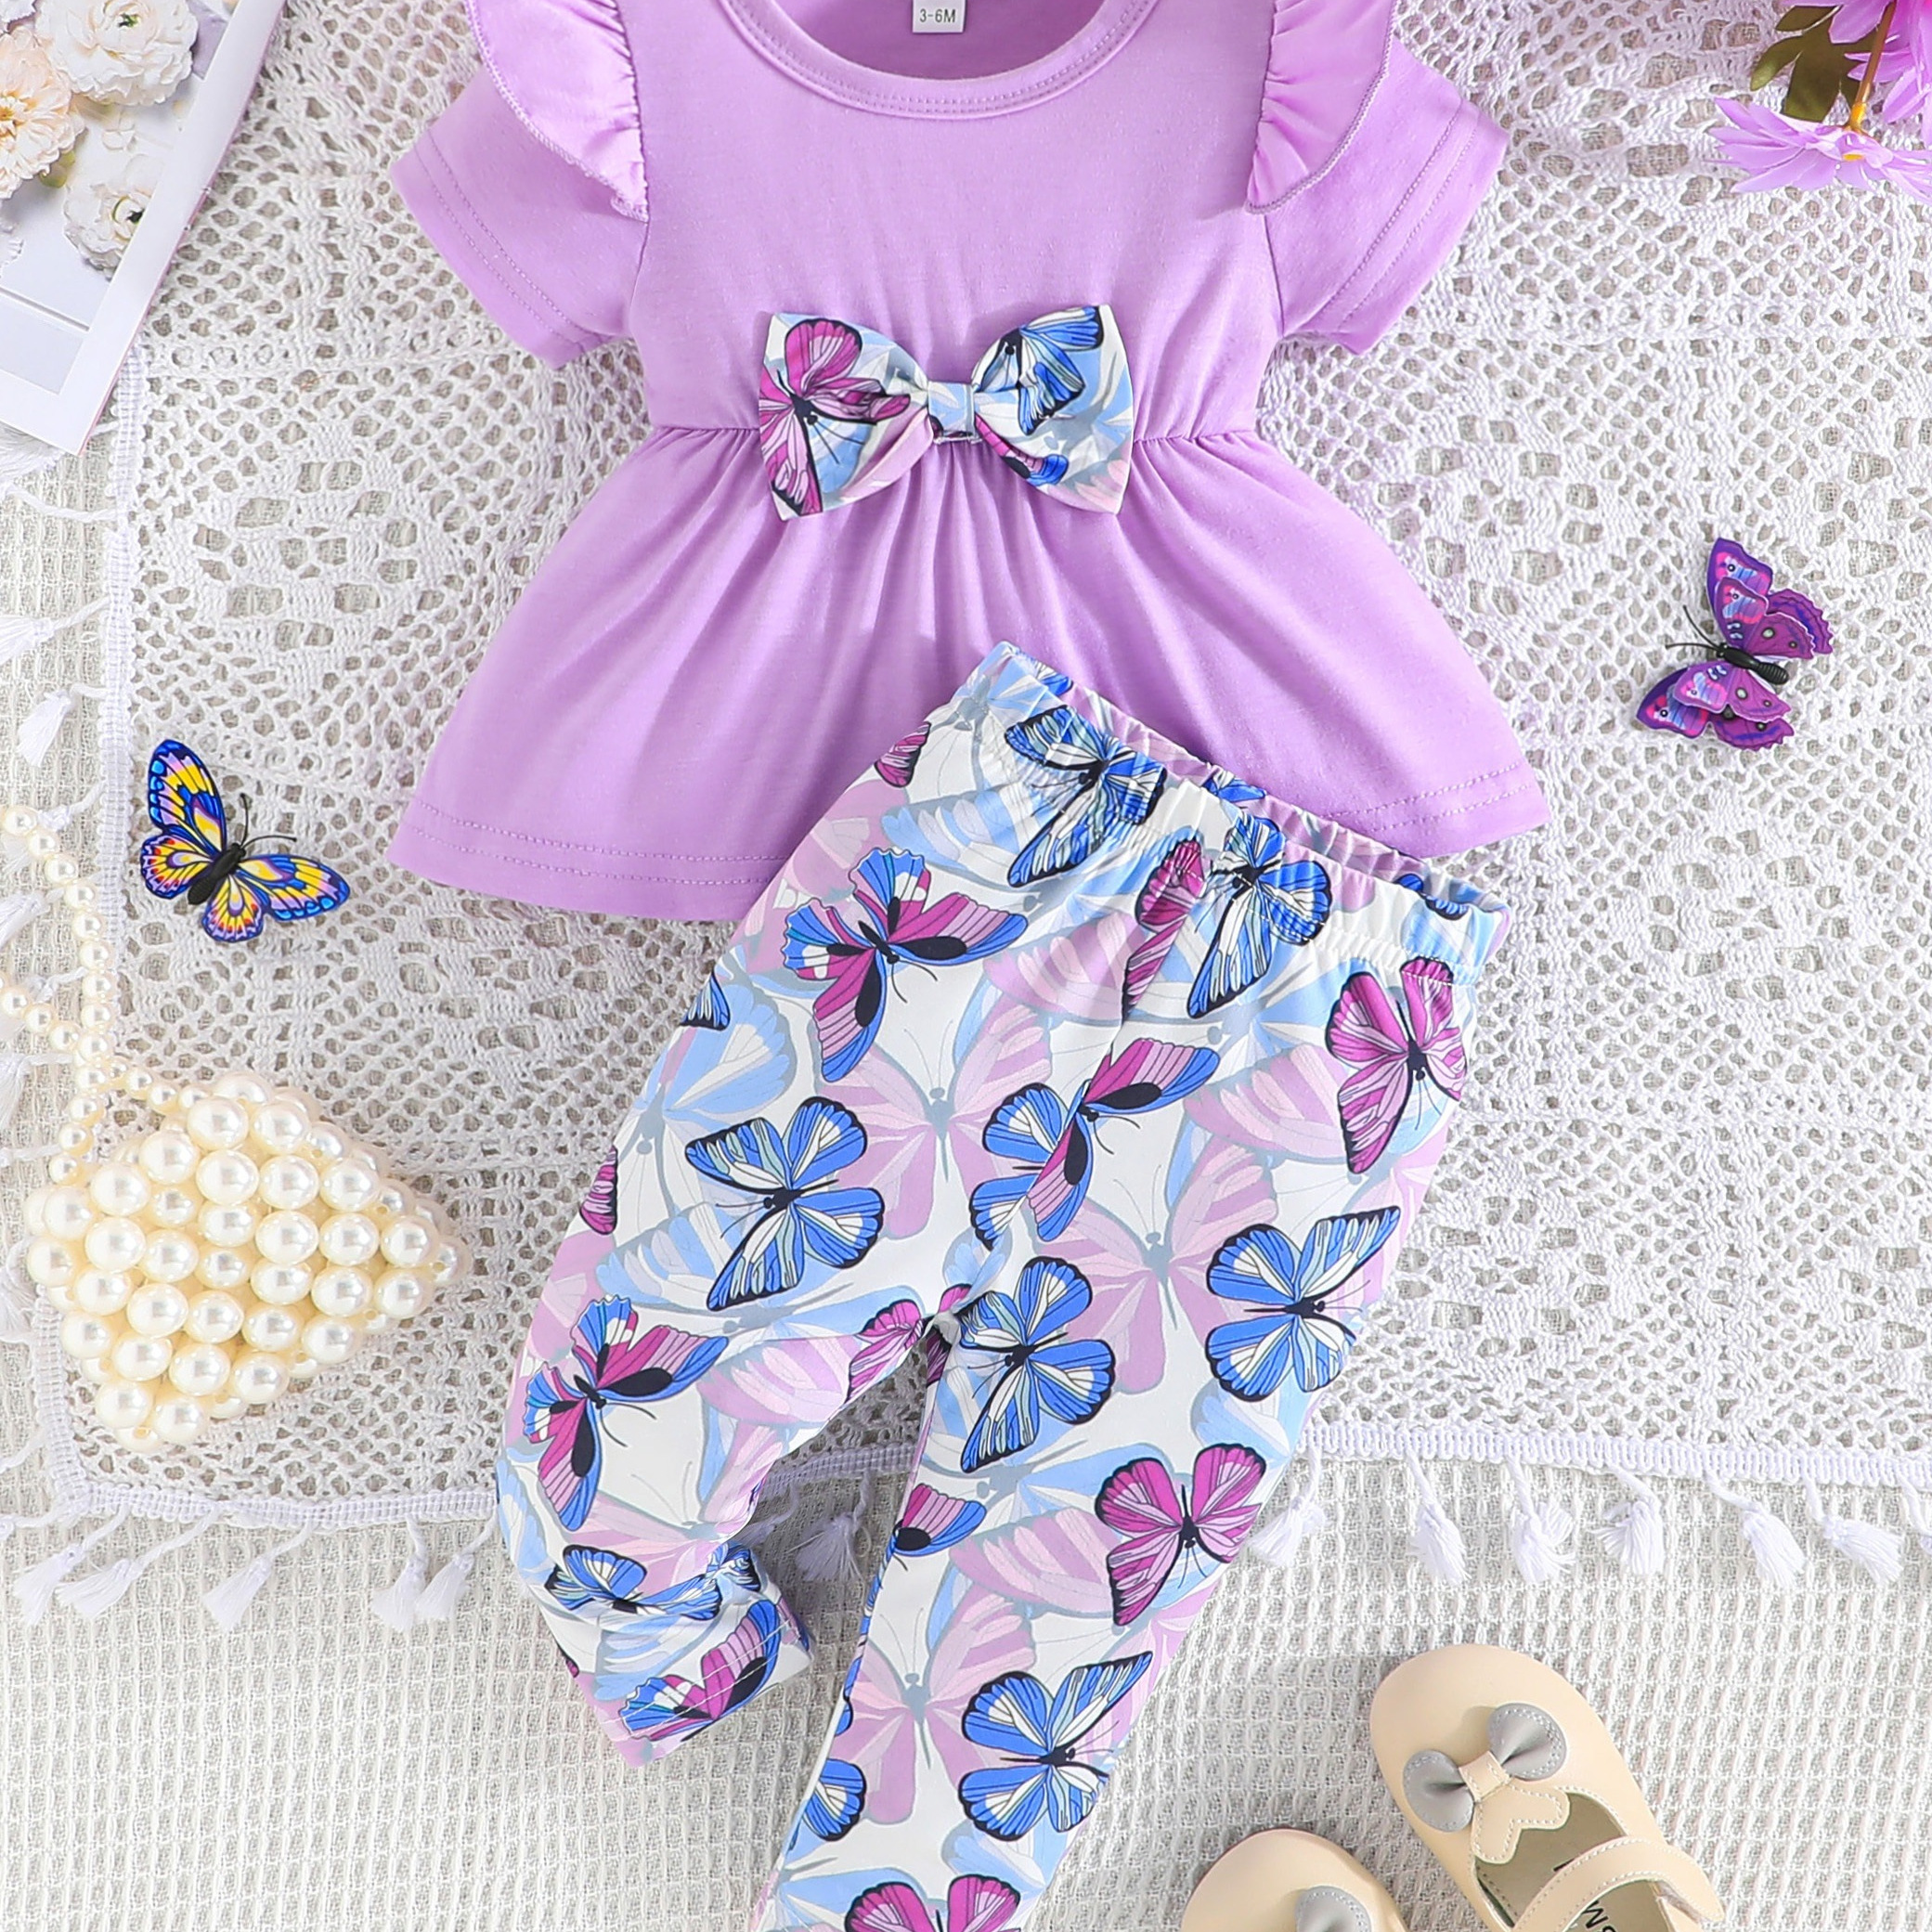 

2pcs Infant & Toddler's Butterfly Pattern Casual Outfit, Short Sleeve Peplum Top & Pants, Baby Girl's Clothes